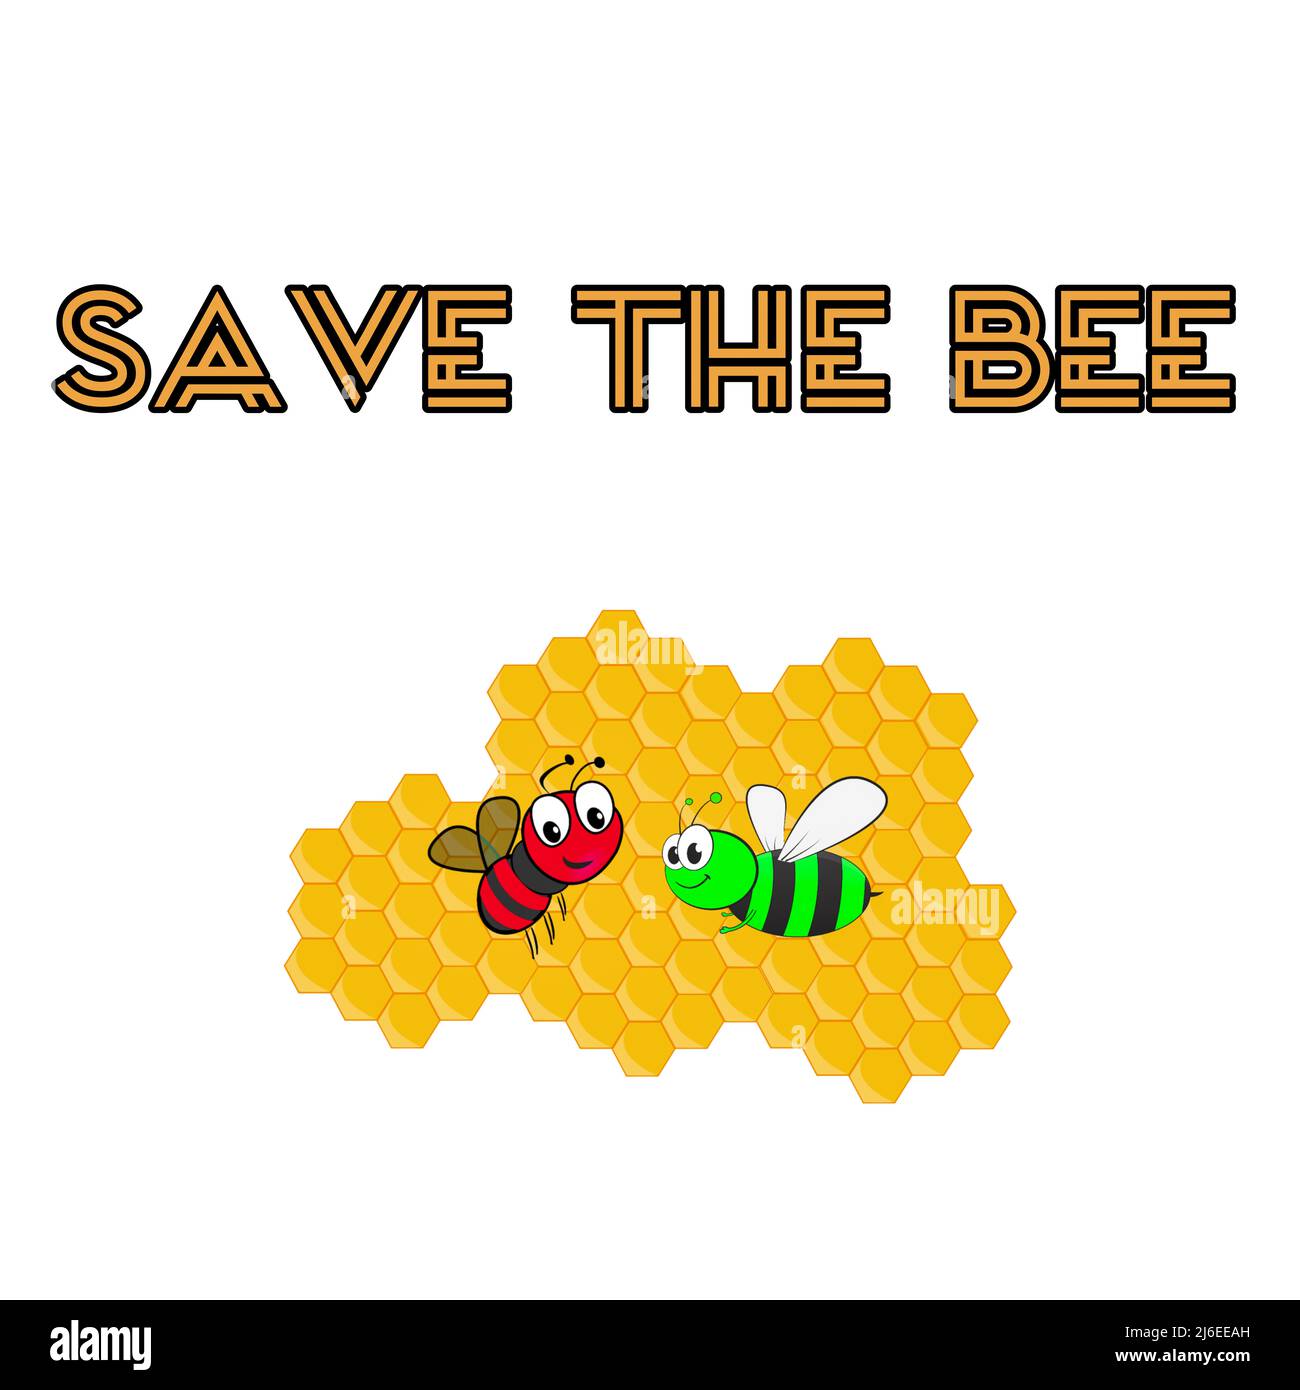 A Save the Bee Text on White Background Illustration Photos Stockfoto